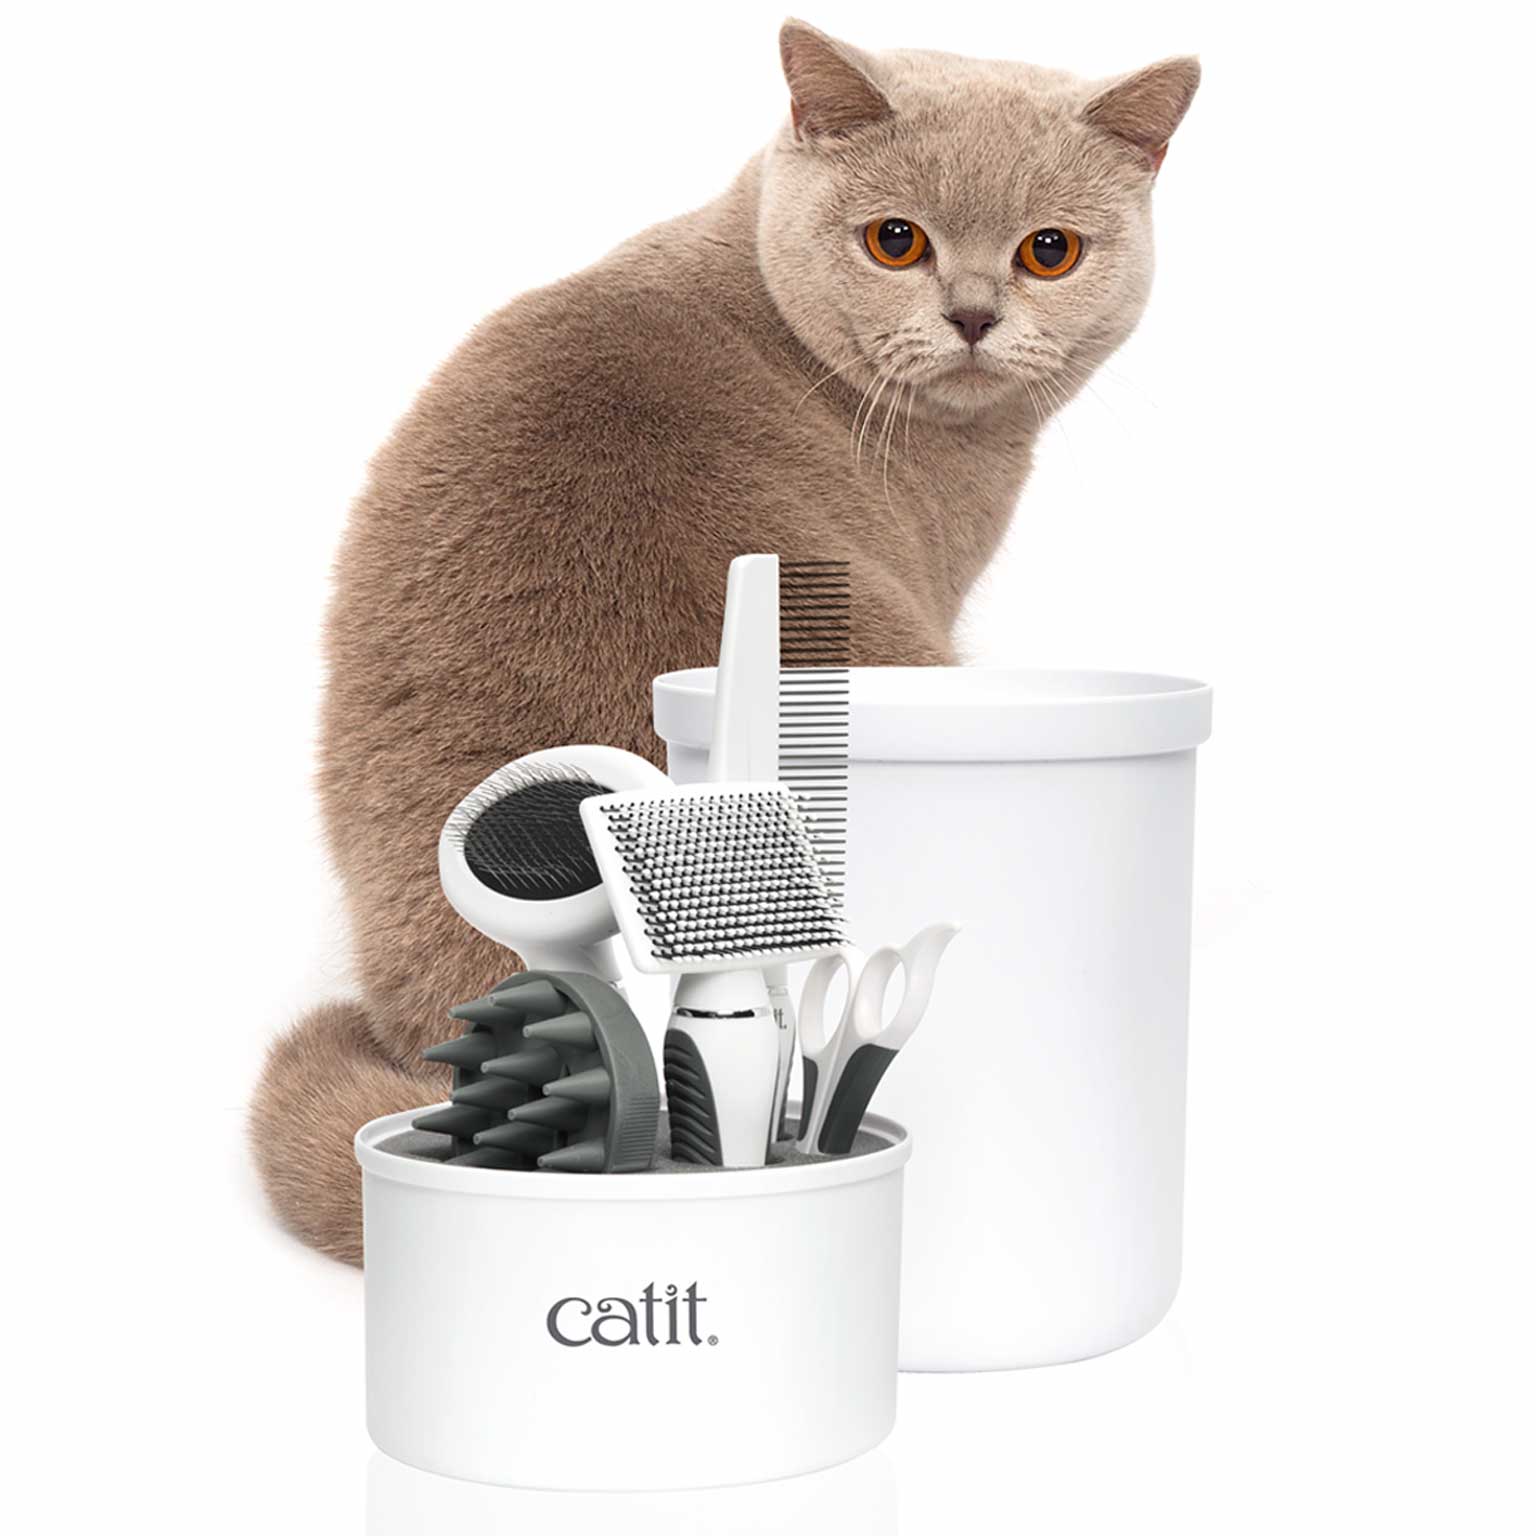 Grooming supplies for shorthaired cats